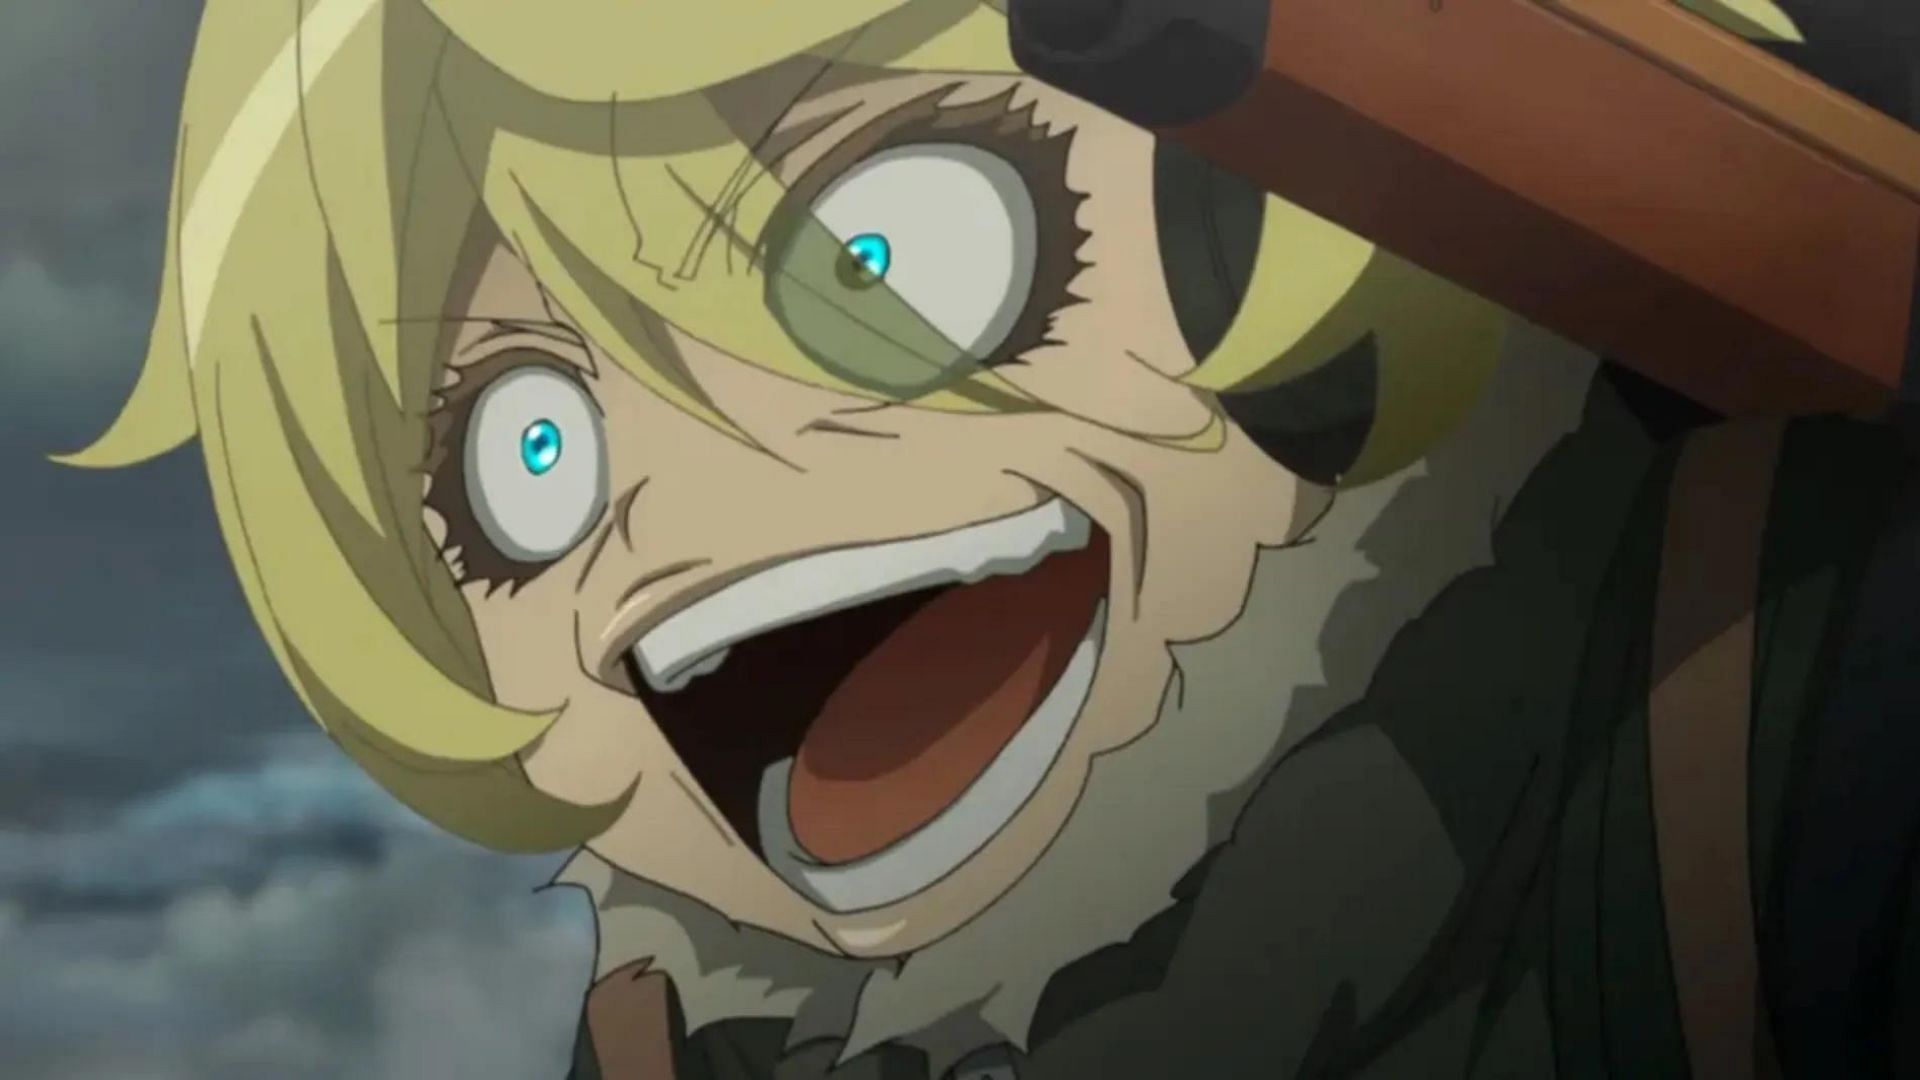 Tanya as seen in the anime (Image via Nut)